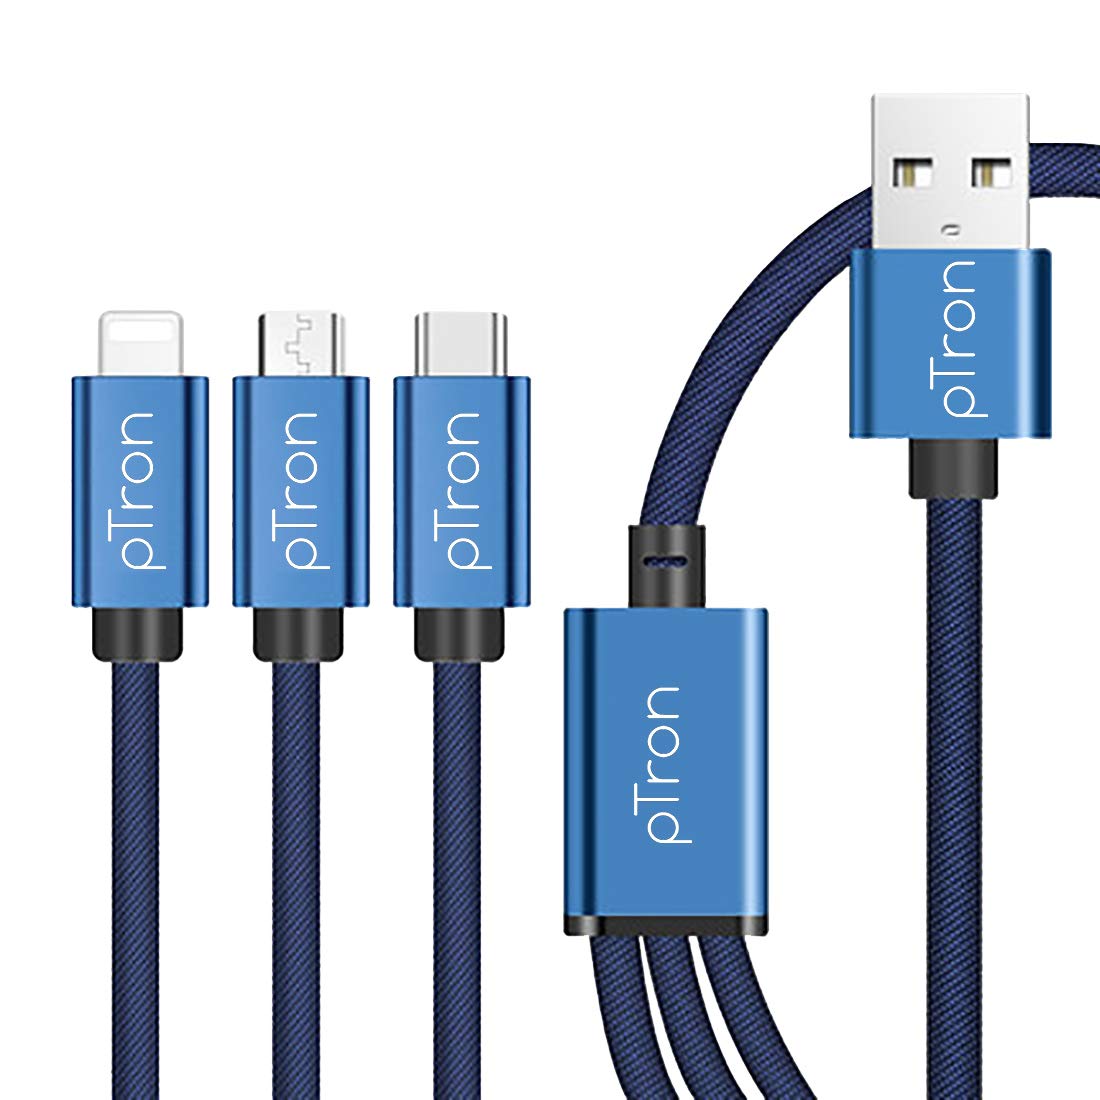 3 in 1 Charging Cable - The Dashing Man